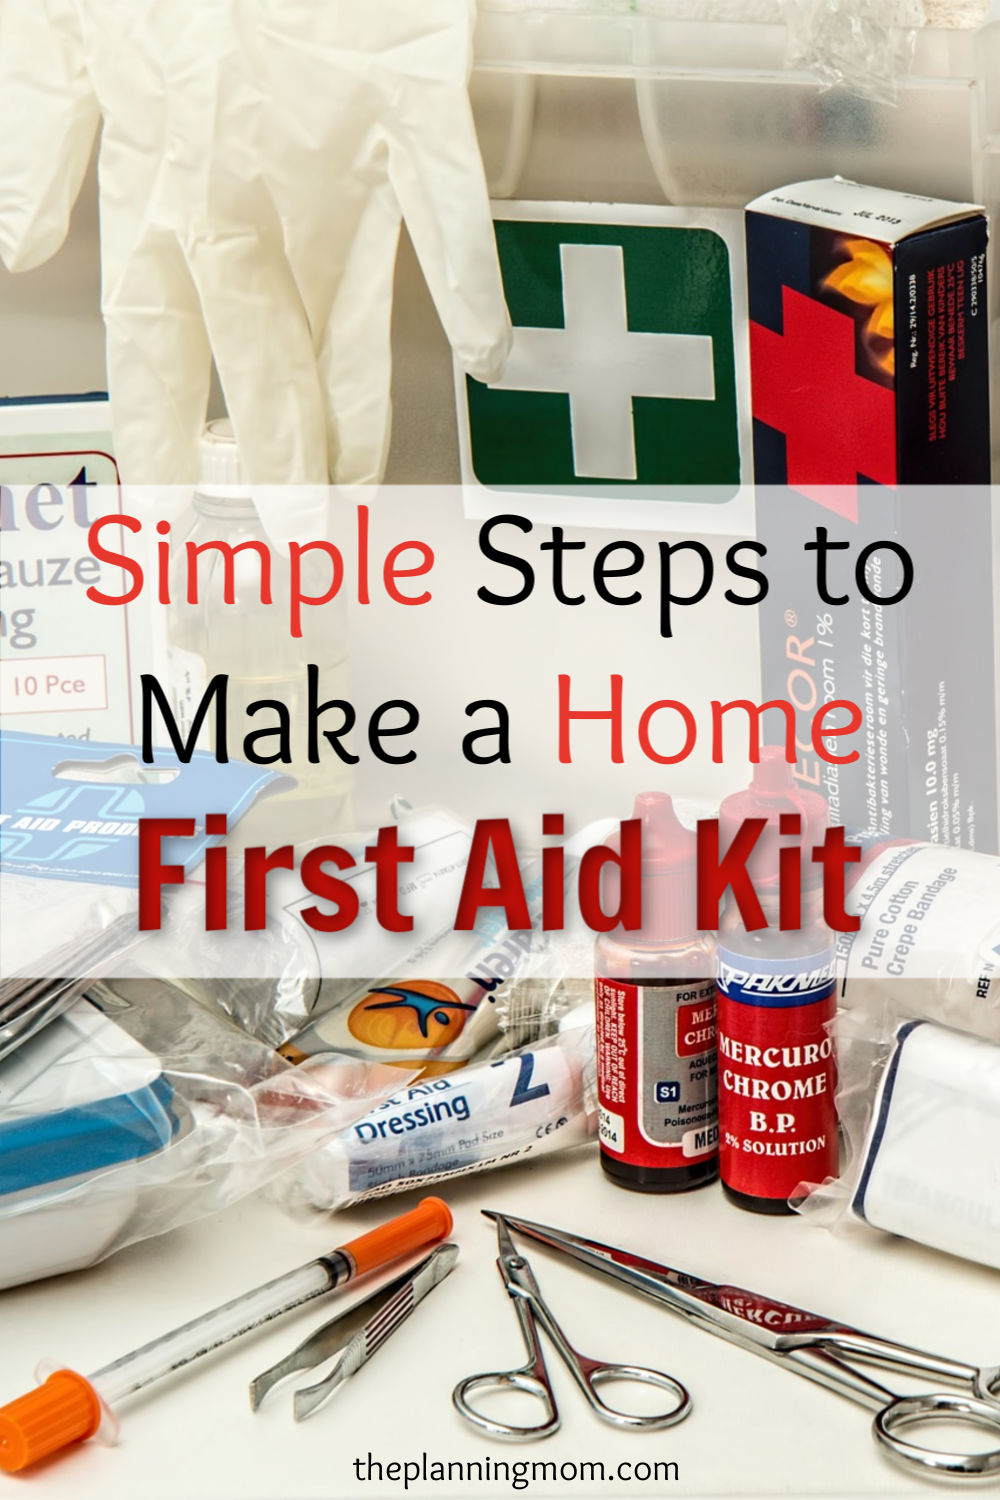 Simple Steps to Make a Home First Aid Kit - The Planning Mom